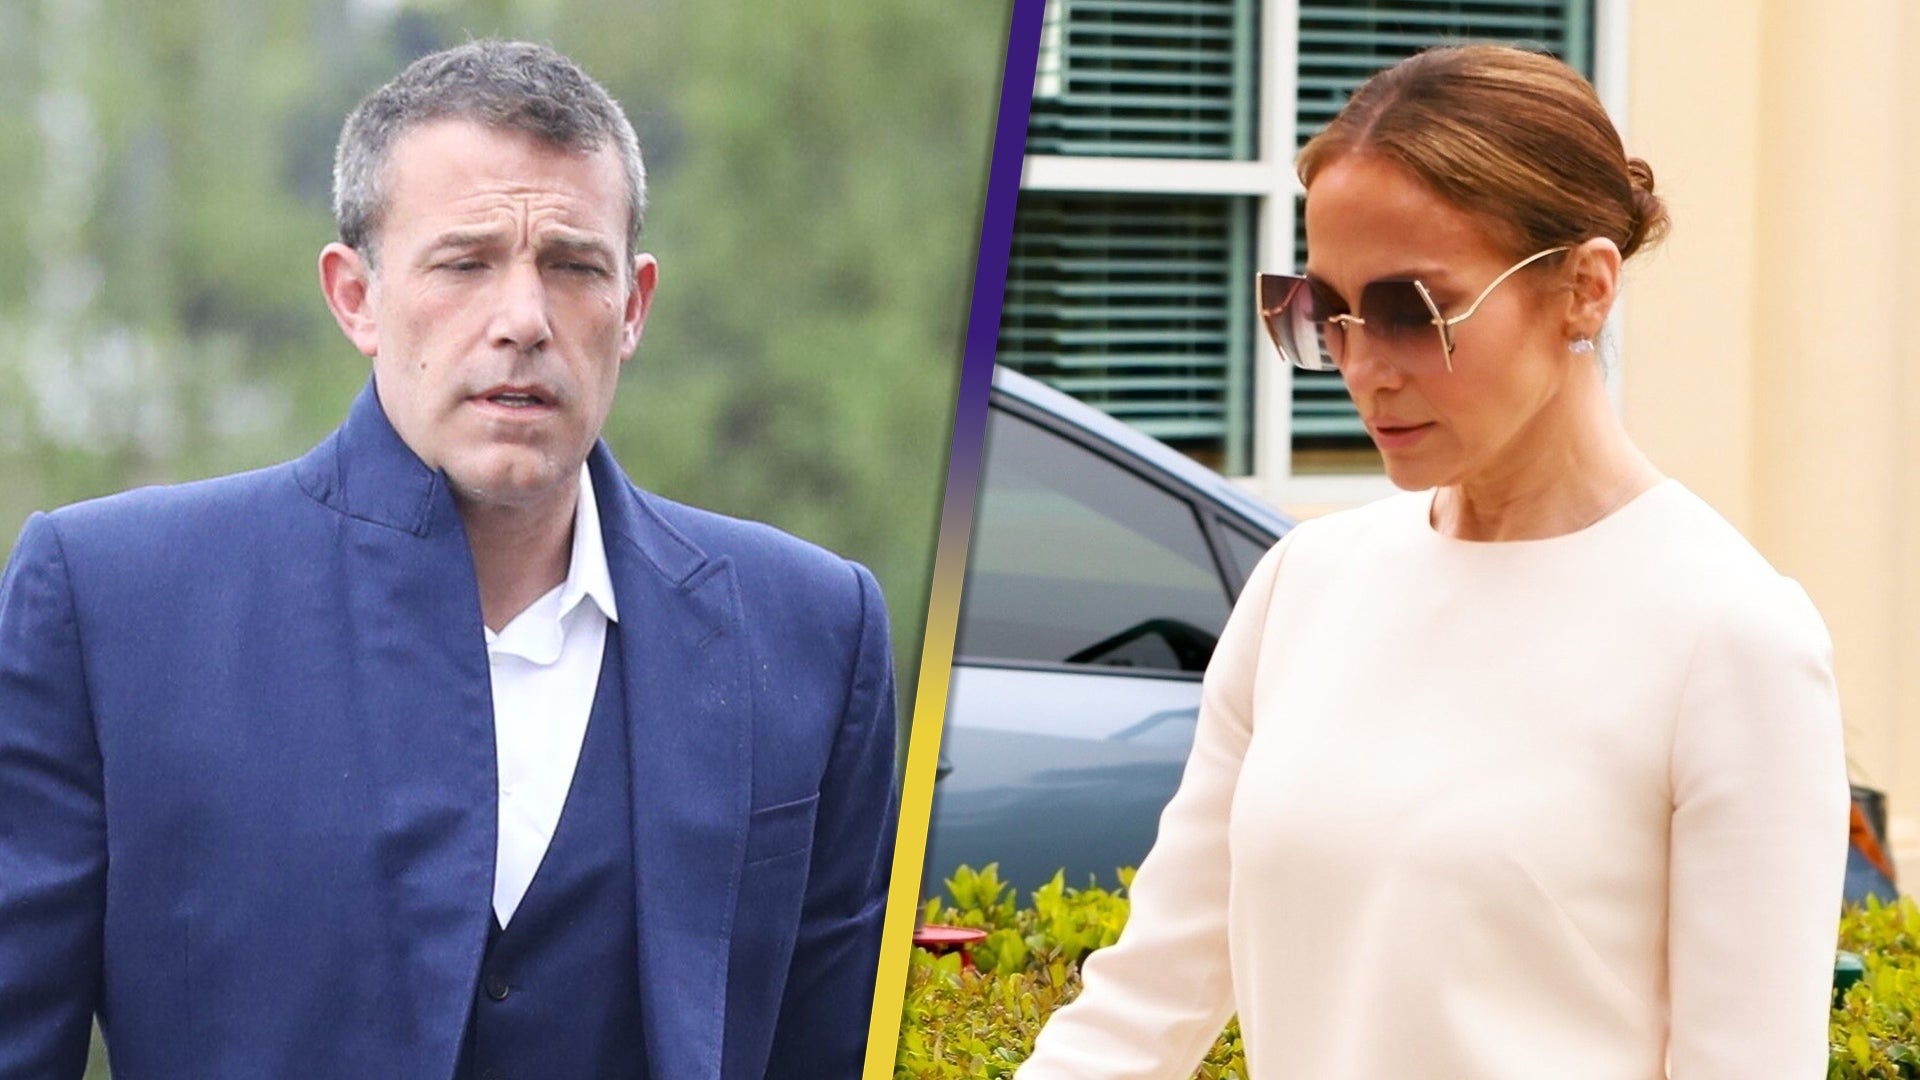 Ben Affleck and Jennifer Lopez Arrive Separately at His Son's Graduation Amid Relationship Troubles